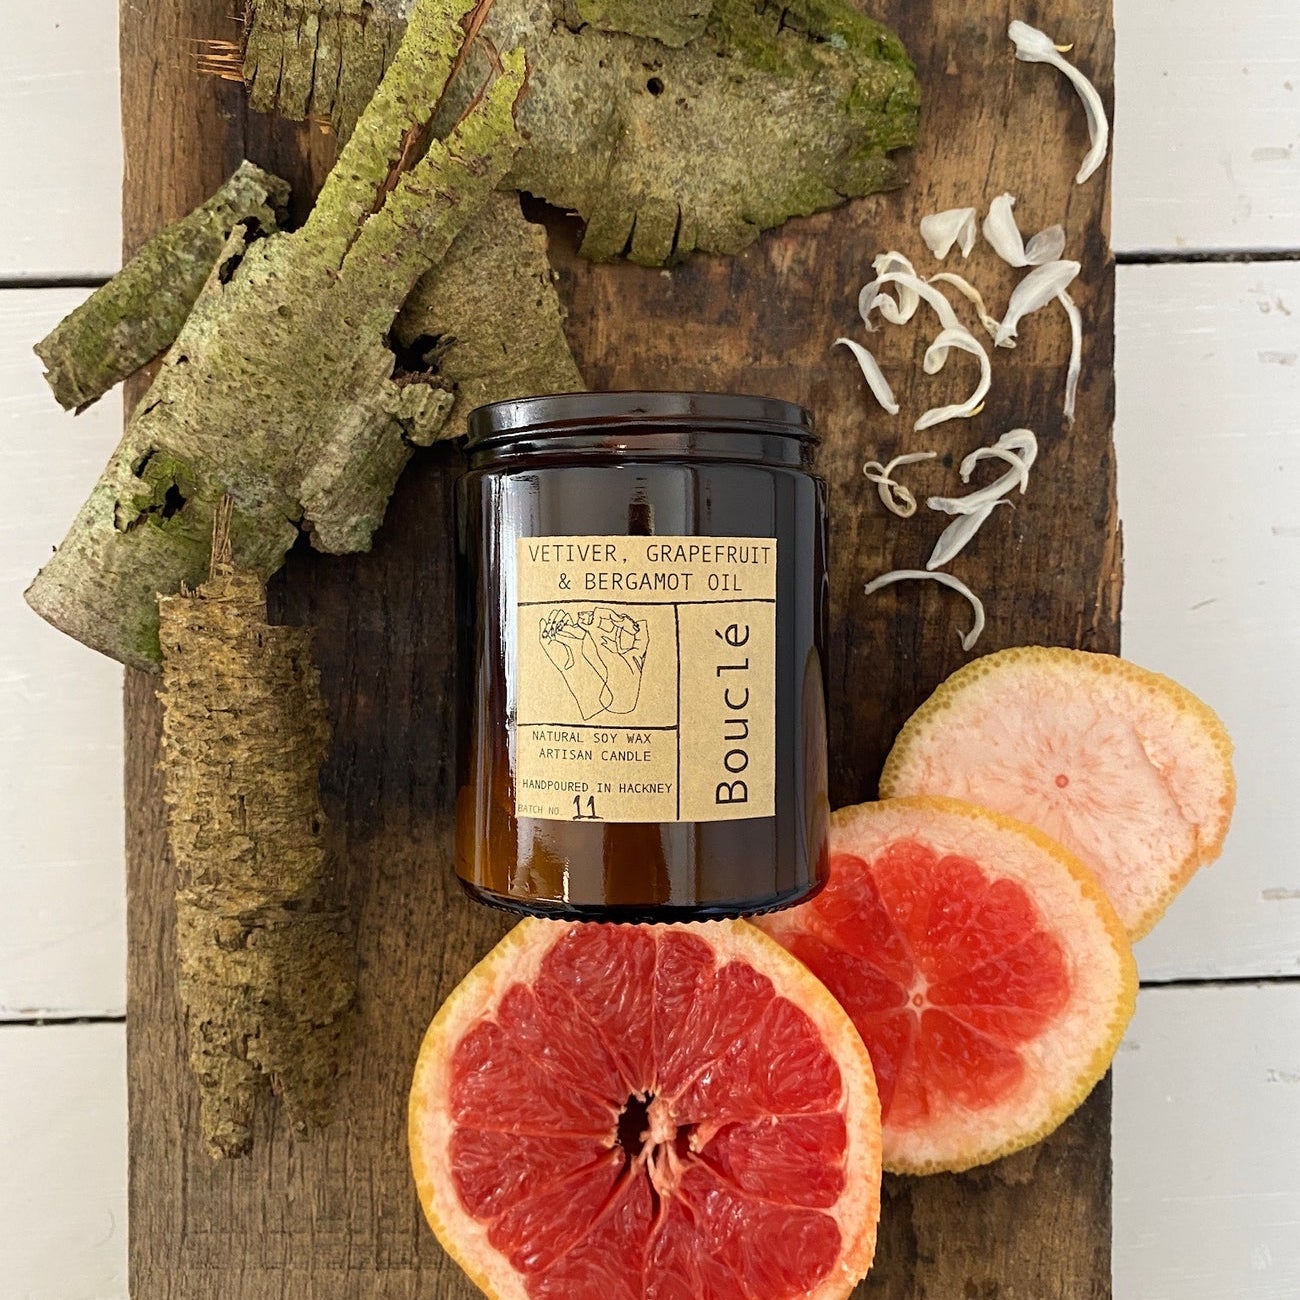 Vetiver, Grapefruit & Bergamot aromatherapy candle with natural ingredients beside it. Made in East London & Brighton.